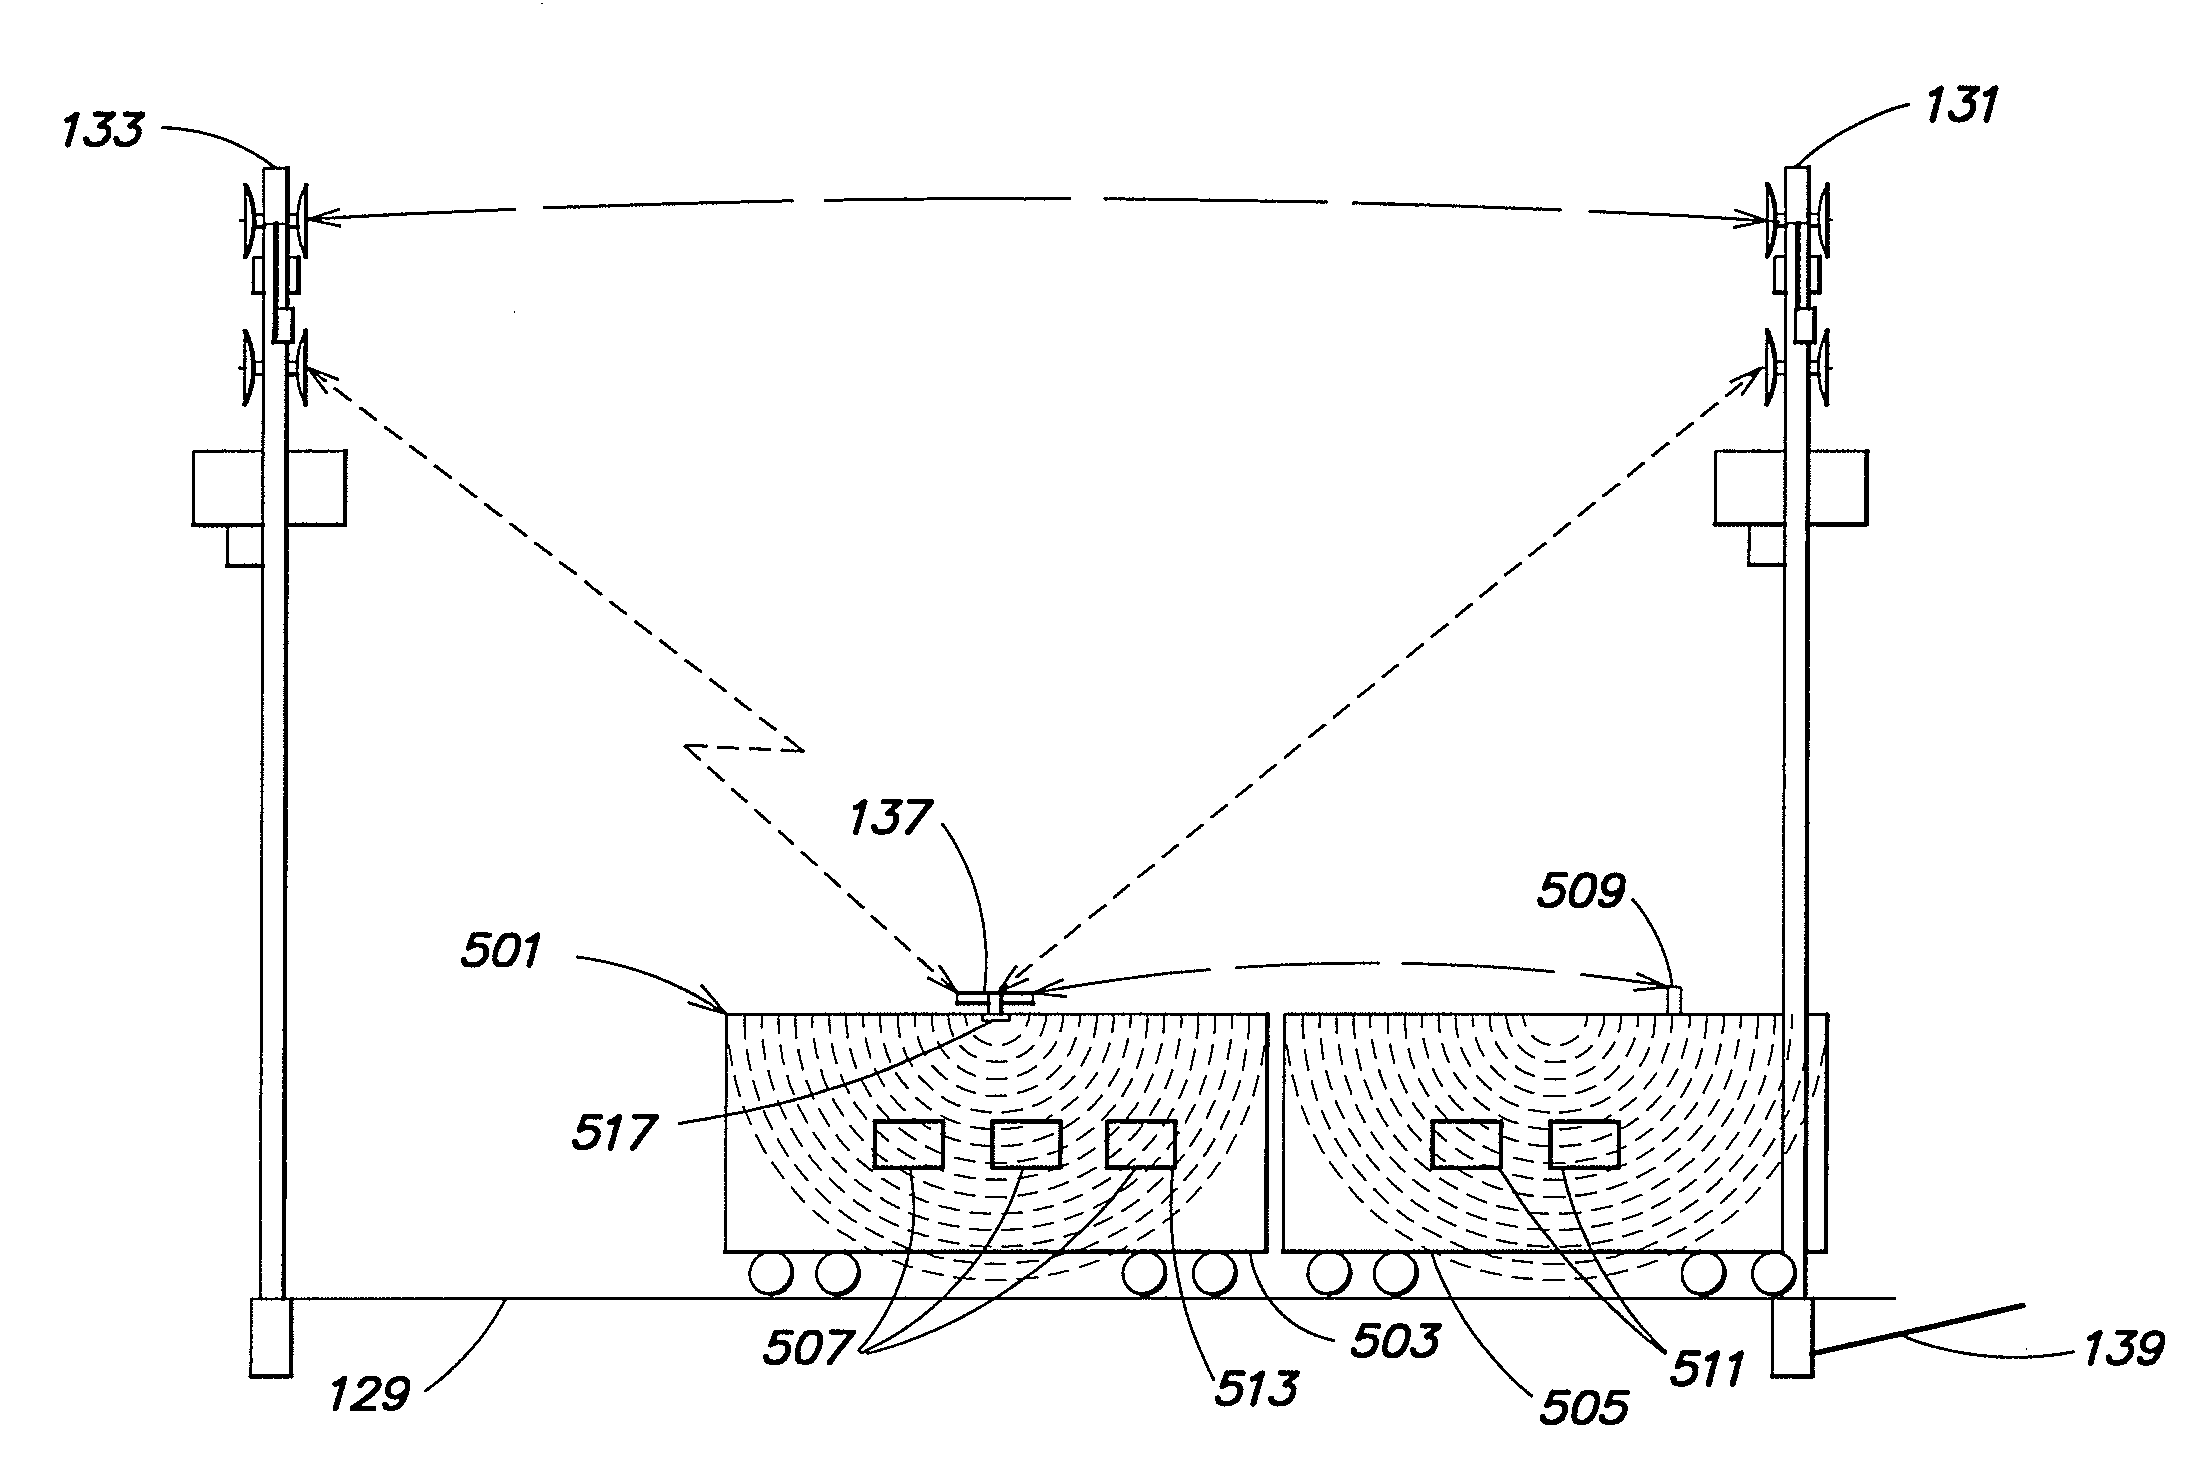 Antenna system for communicating with mobile devices